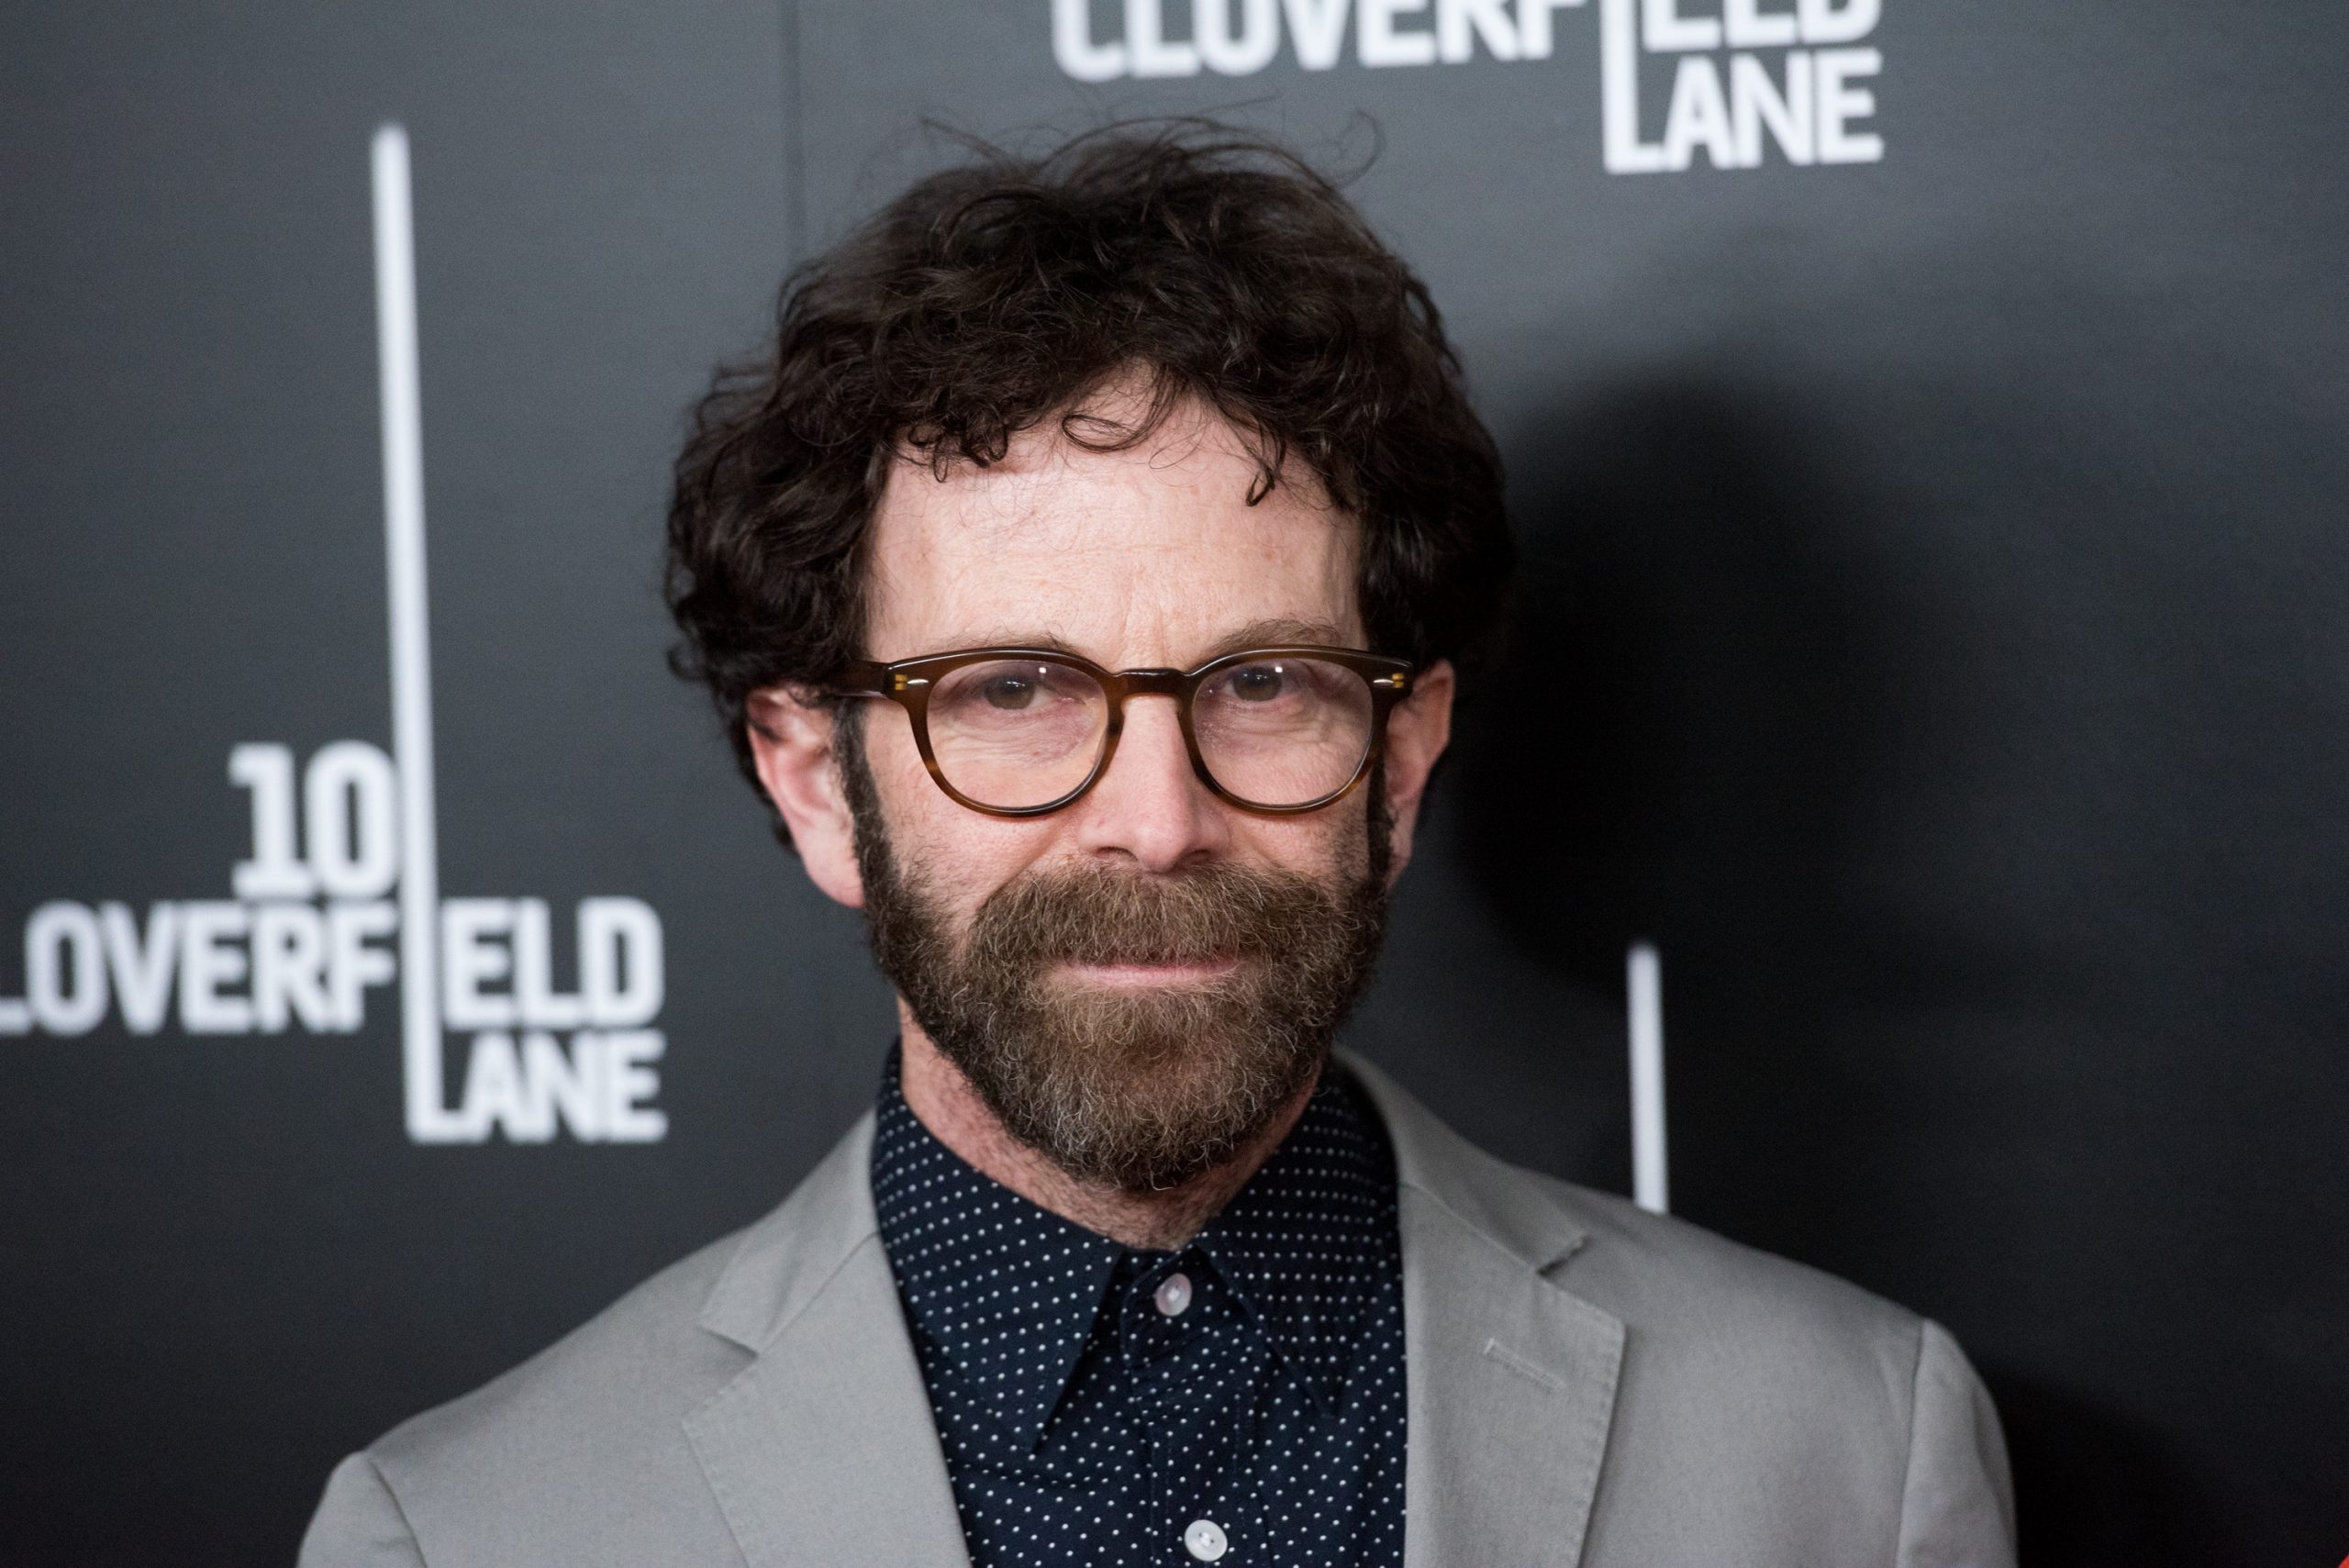 Charlie Kaufman: If Hollywood Wants ‘Garbage,’ They ‘Might as Well Have A.I.’ Write Scripts